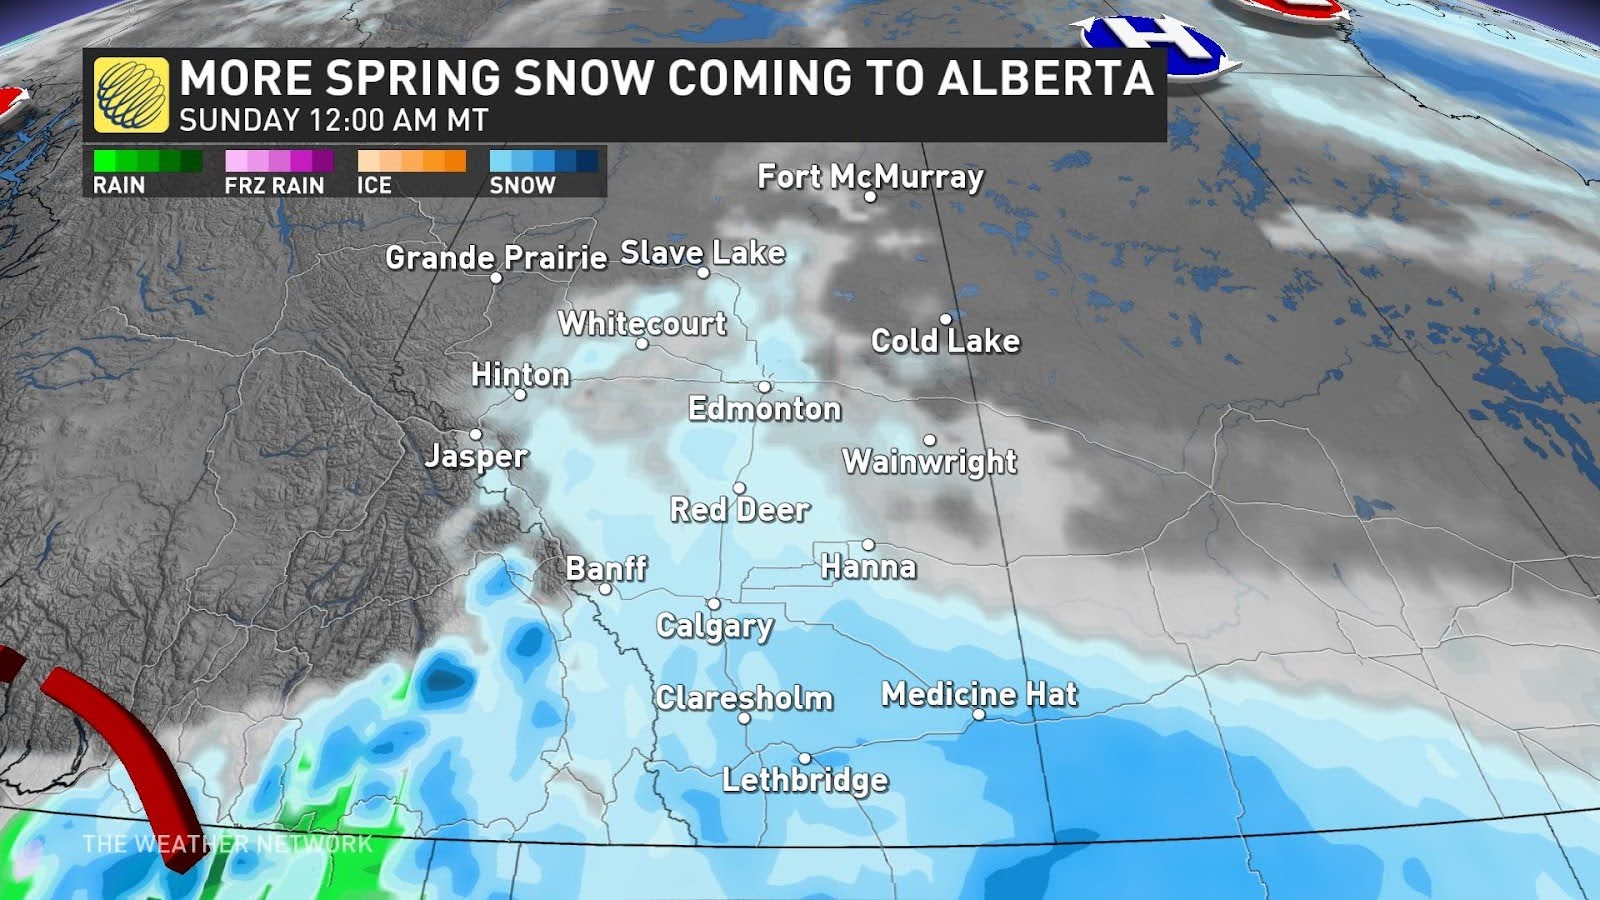 slow travel expected as alberta snows continue into sunday